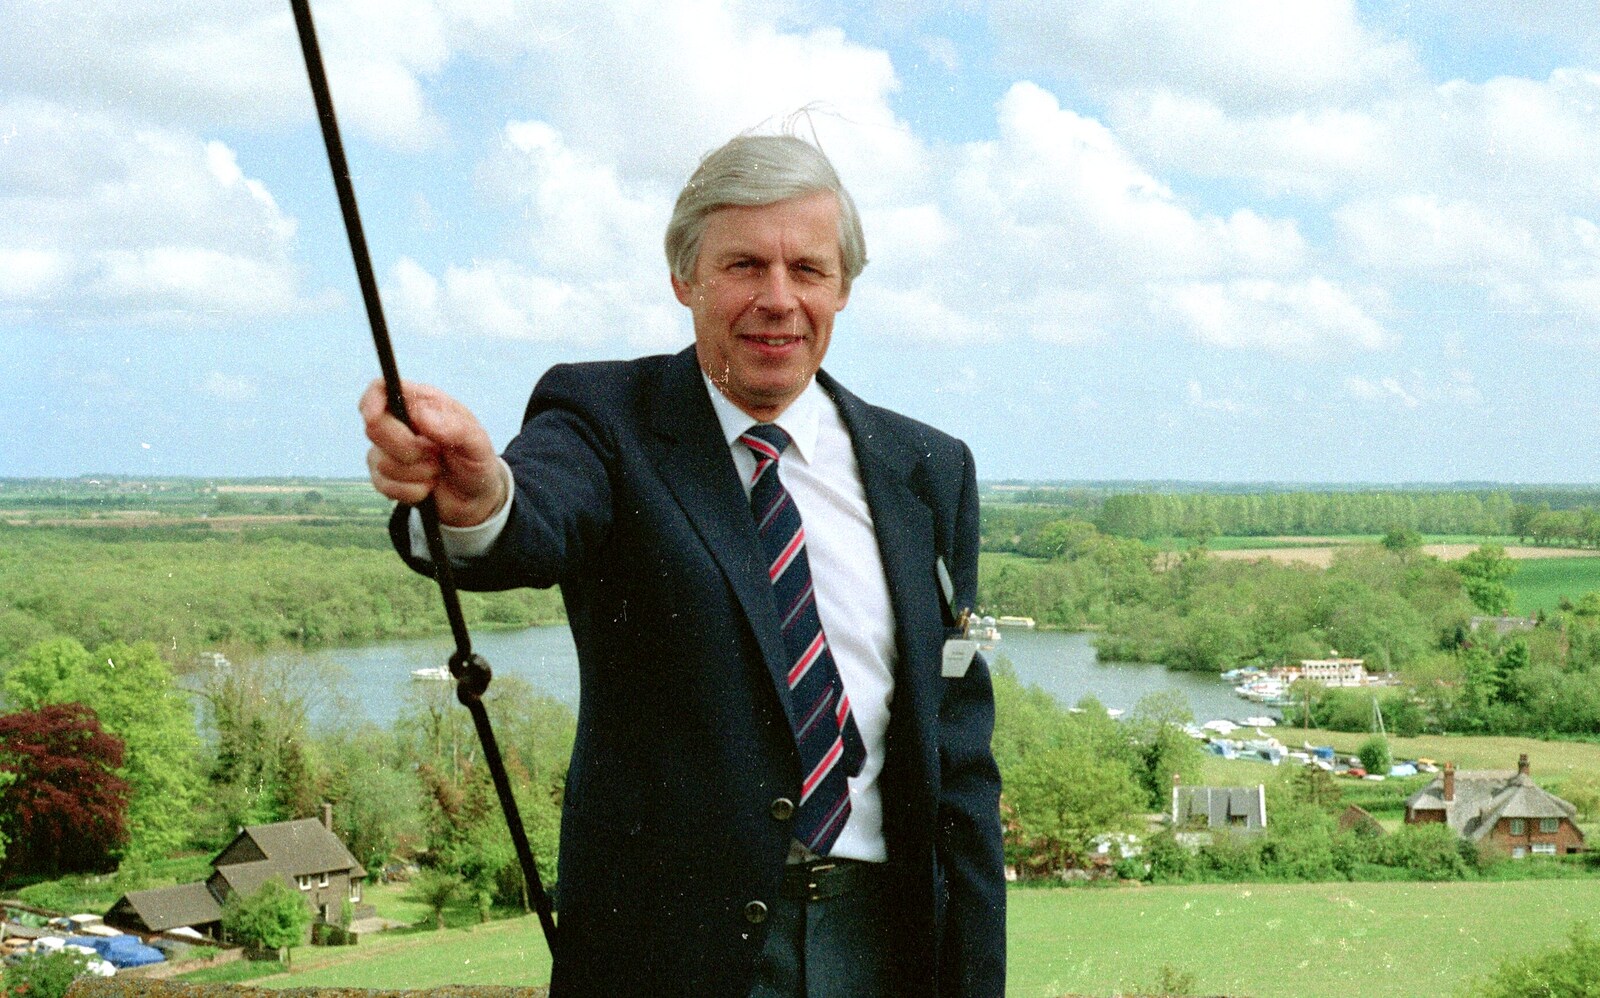 Don Dawson, in boat-club blazer and tie from A Soman-Wherry Press Boat Trip, Horning, The Broads, Norfolk - 8th May 1988